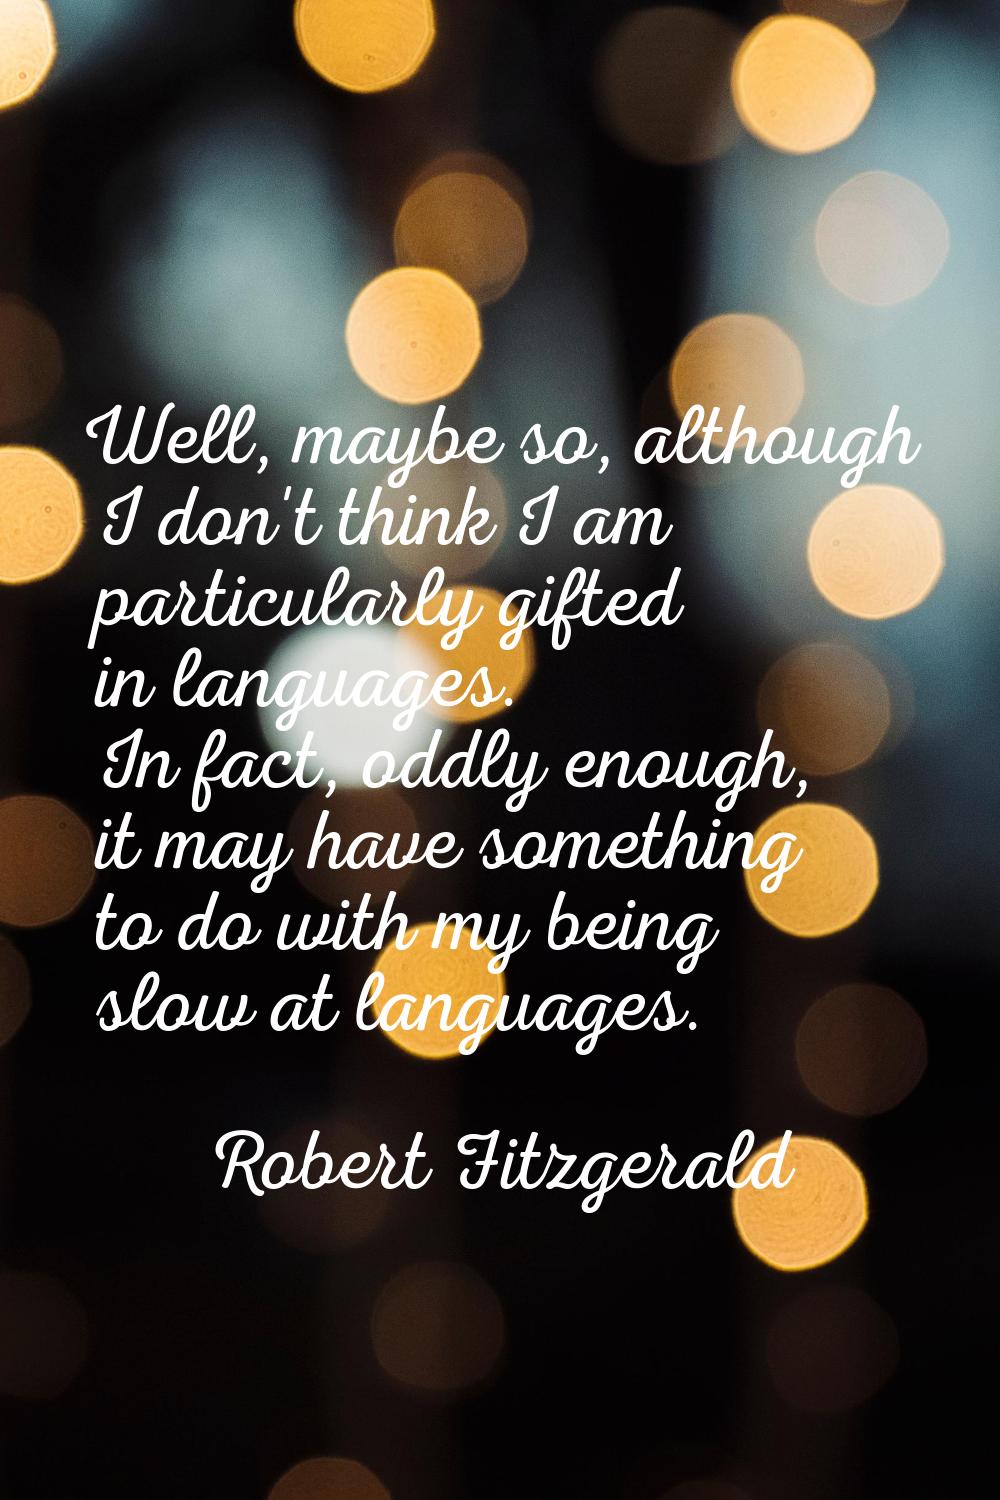 Well, maybe so, although I don't think I am particularly gifted in languages. In fact, oddly enough